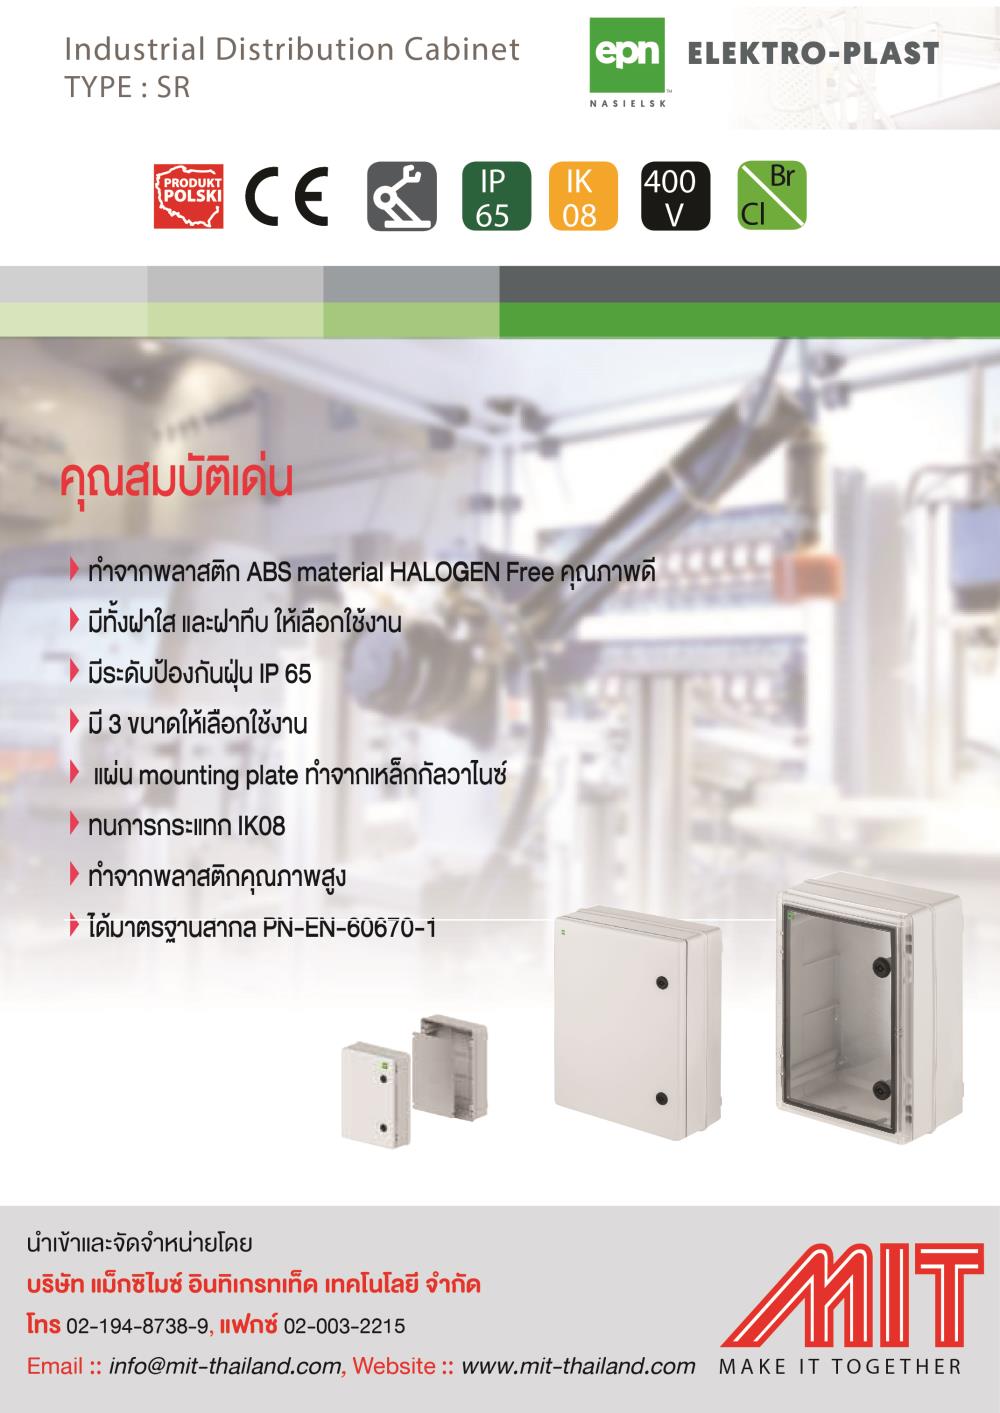 Industrial Distribution Cabinet,#enclosure,EPN,Electrical and Power Generation/Electrical Equipment/Switchboards